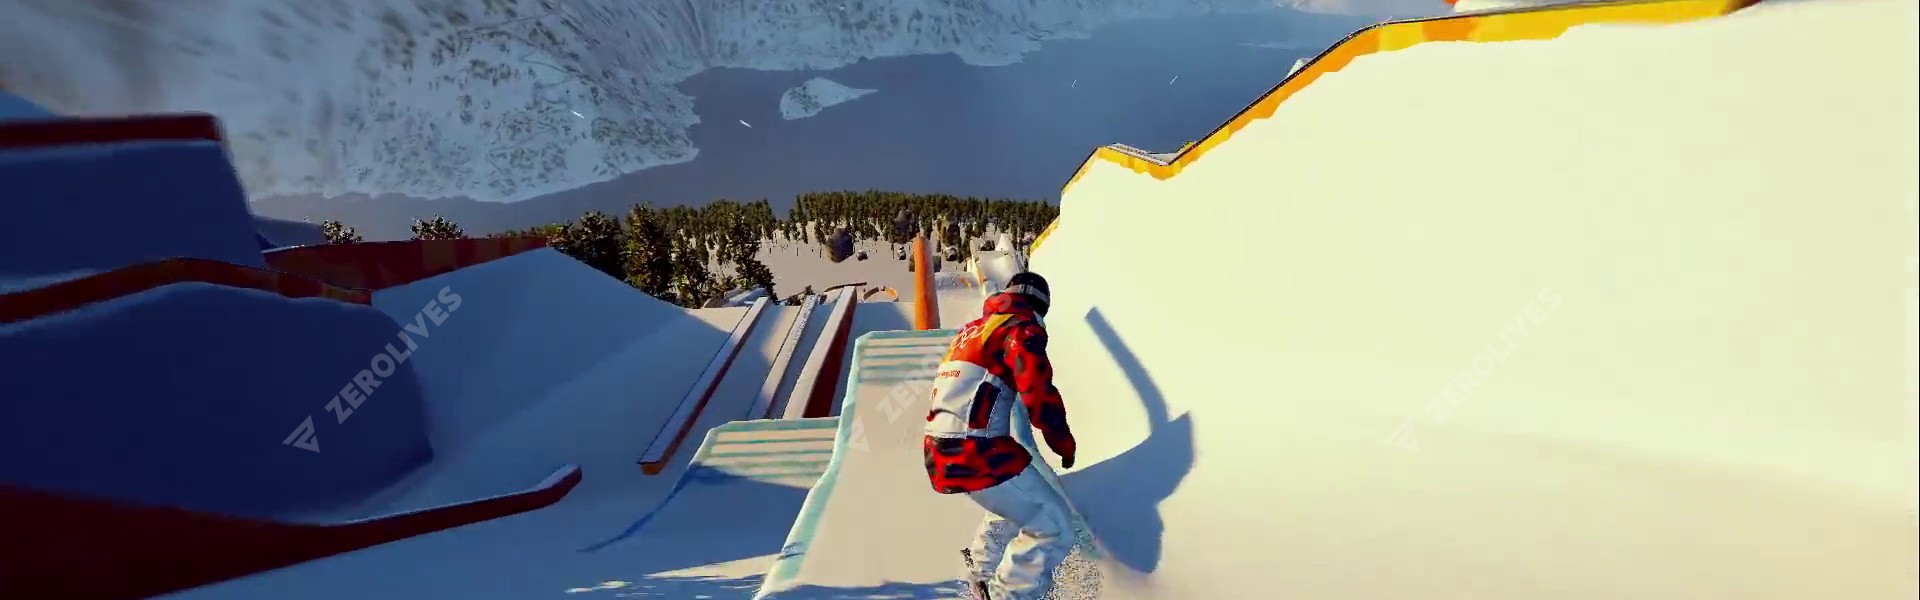 Steep: Road to the Olympics